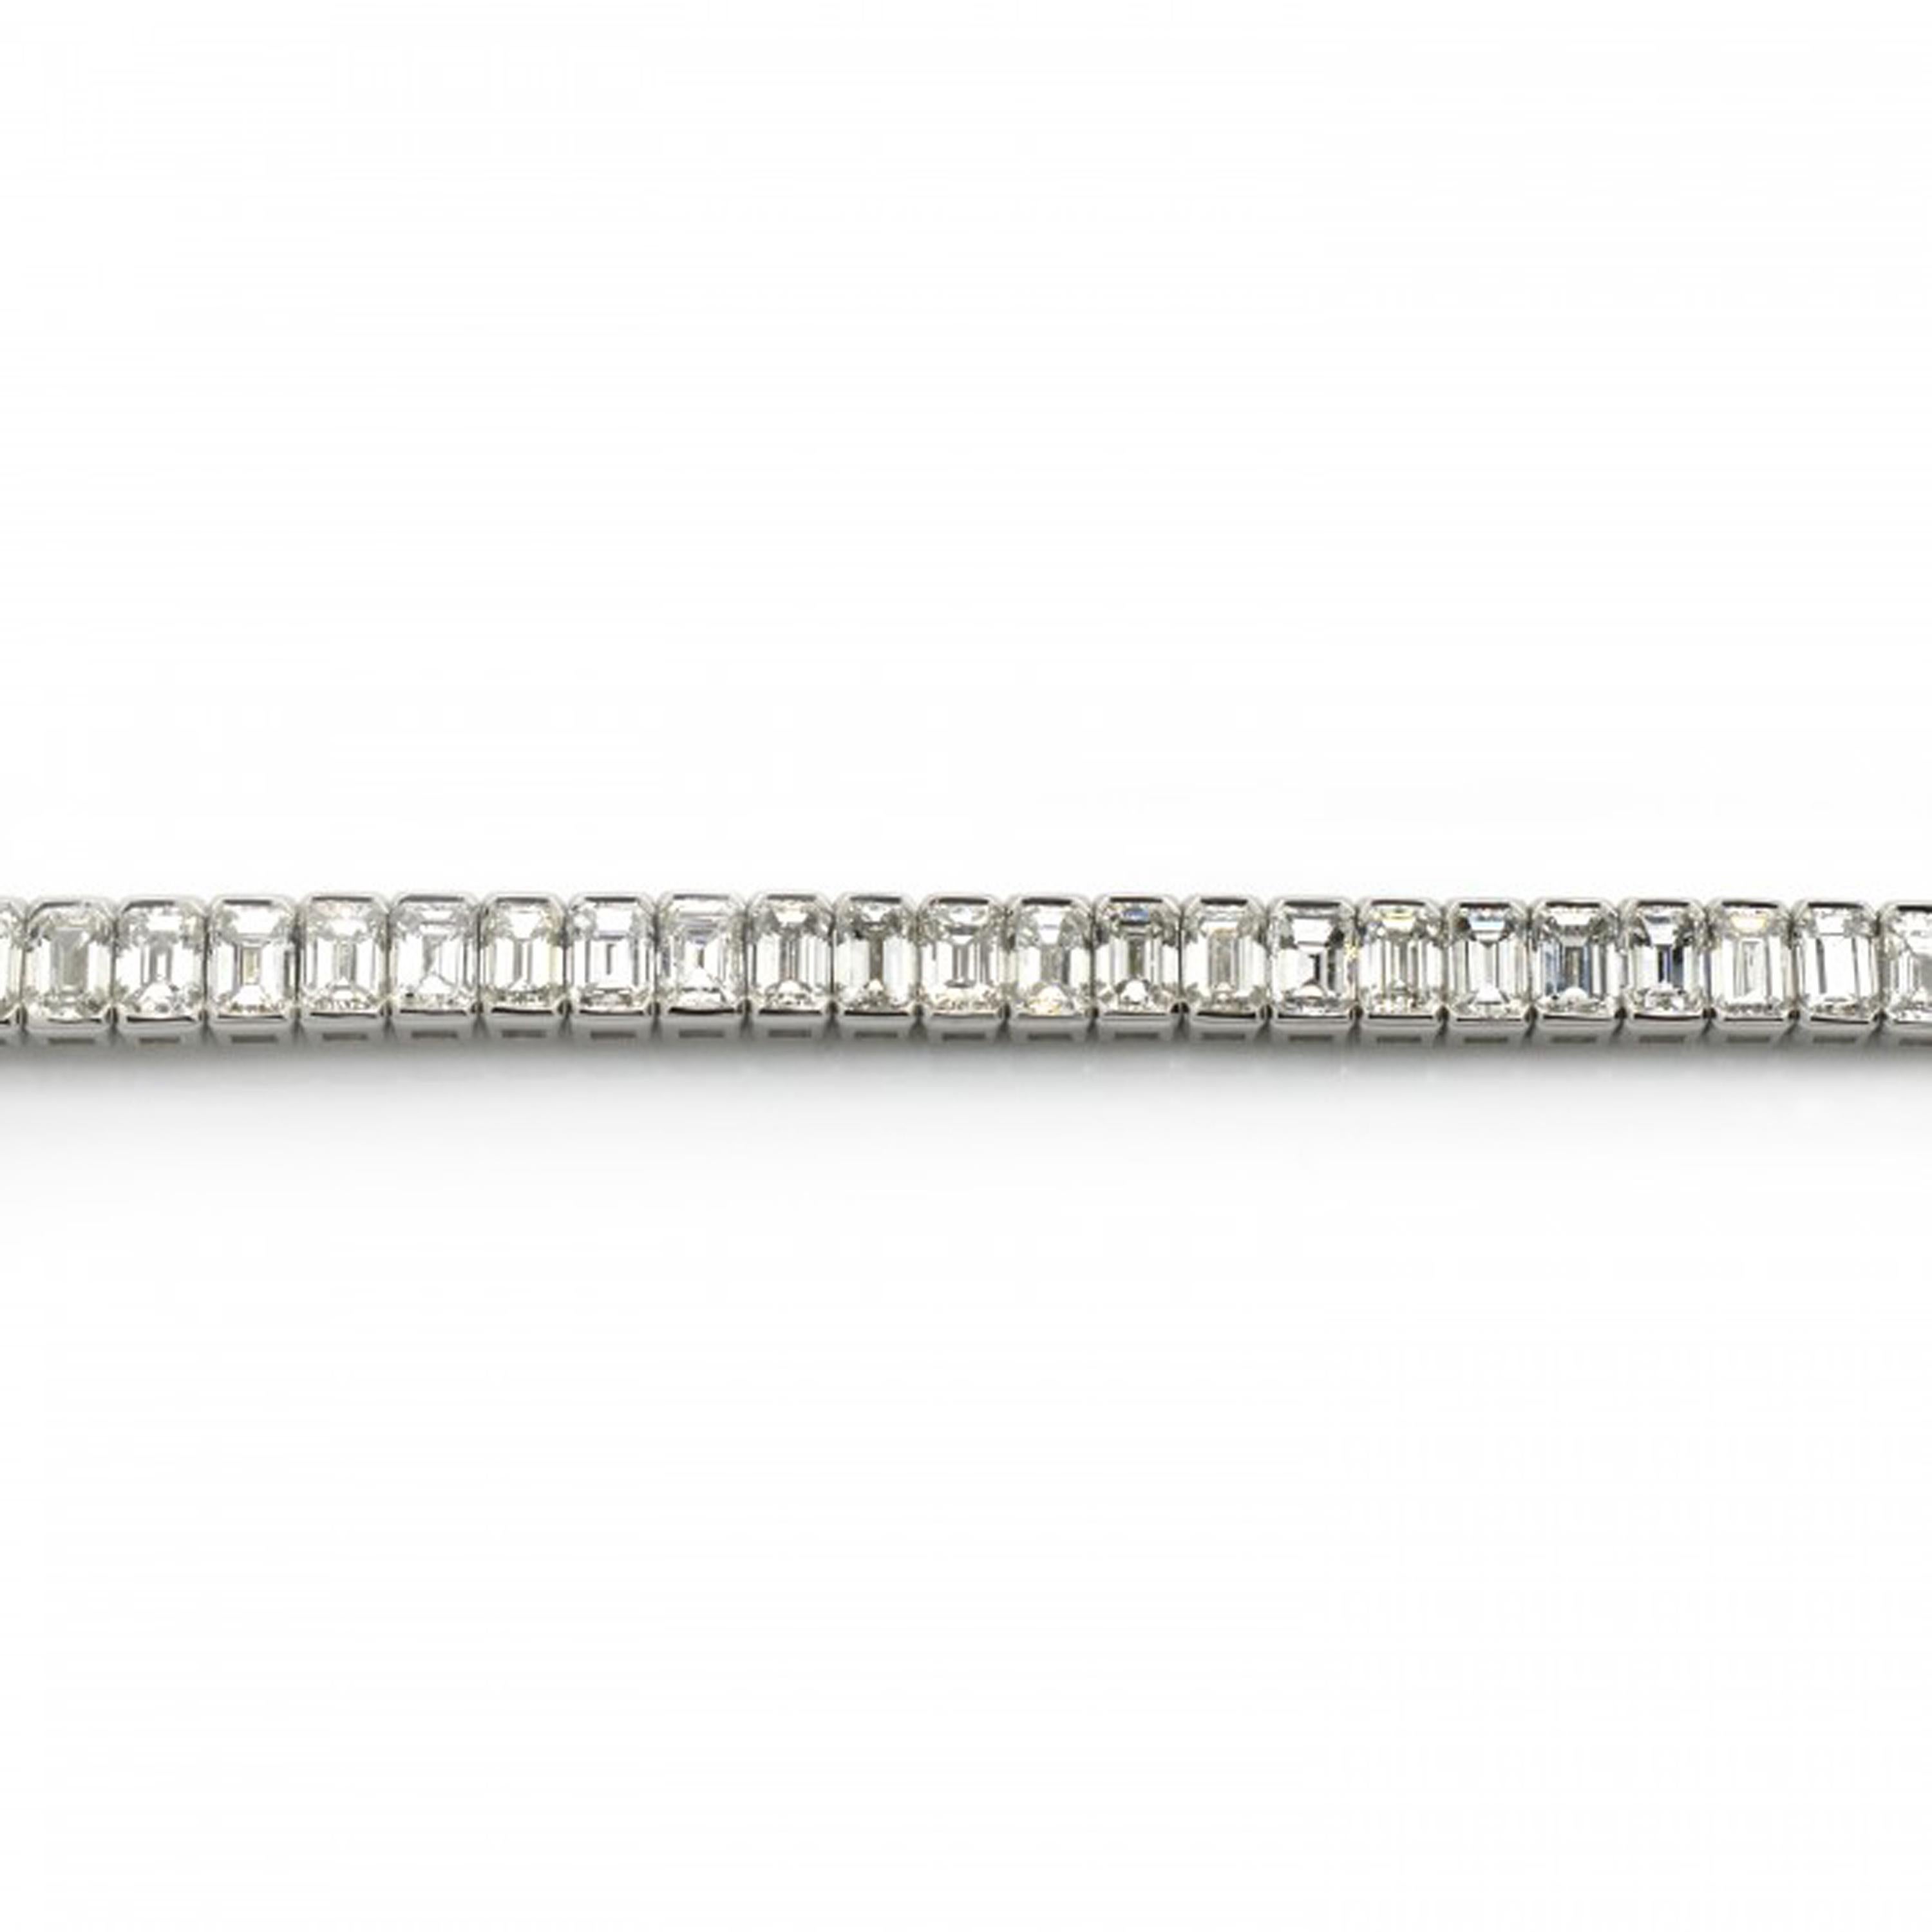 A diamond line bracelet, featuring sixty emerald-cut diamonds, with a total weight of 14.84ct, individually hinged, mounted in platinum.